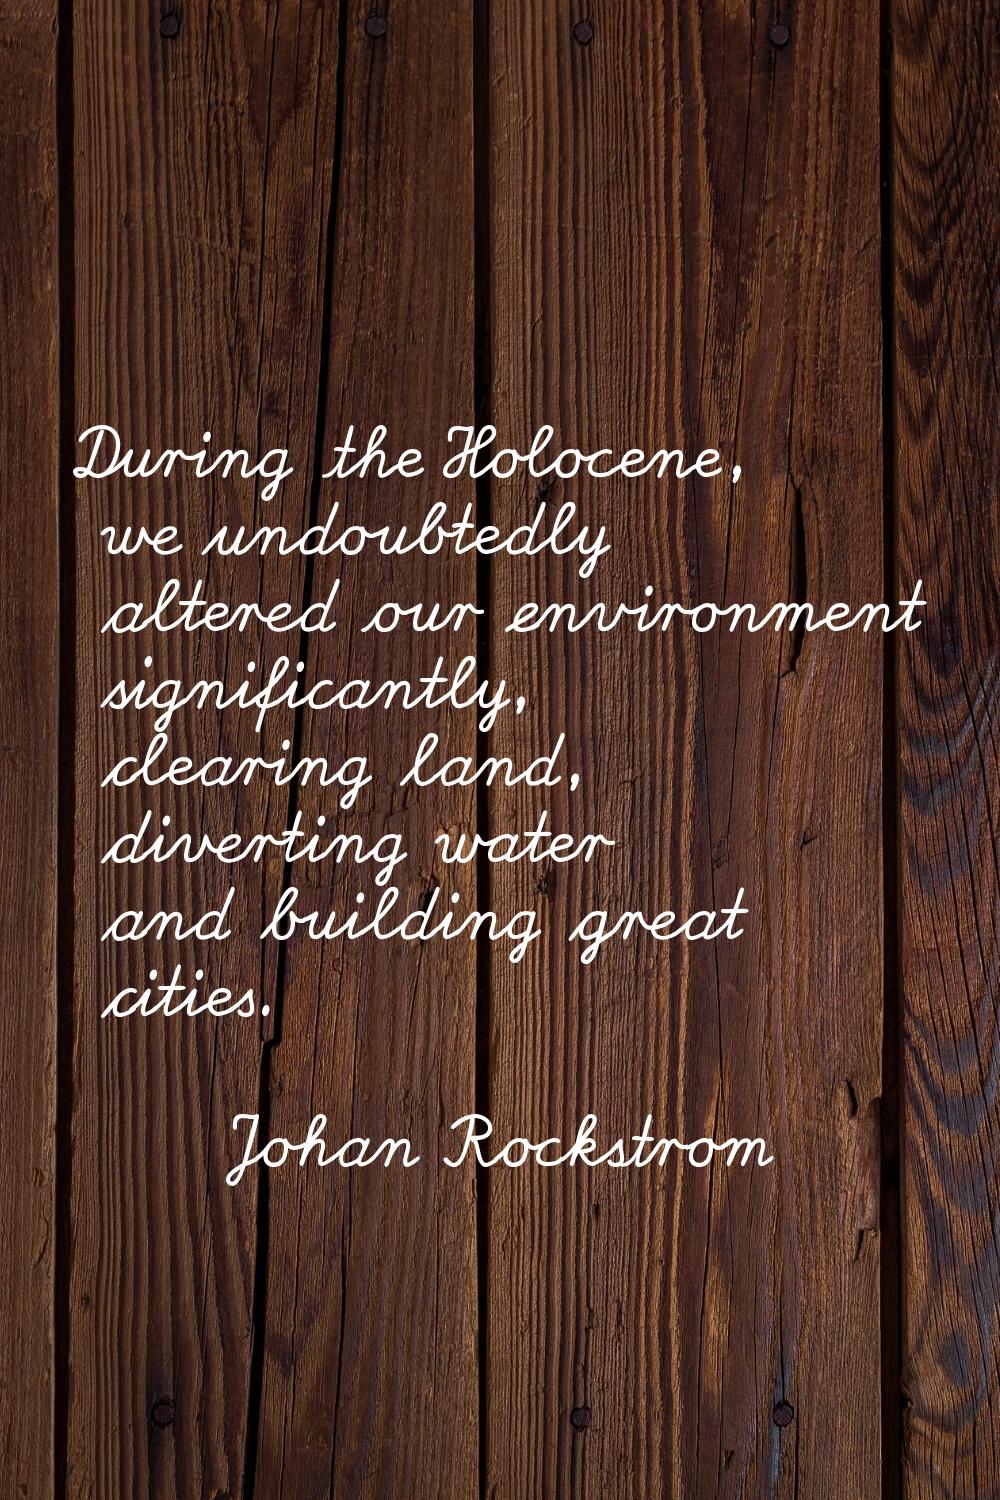 During the Holocene, we undoubtedly altered our environment significantly, clearing land, diverting